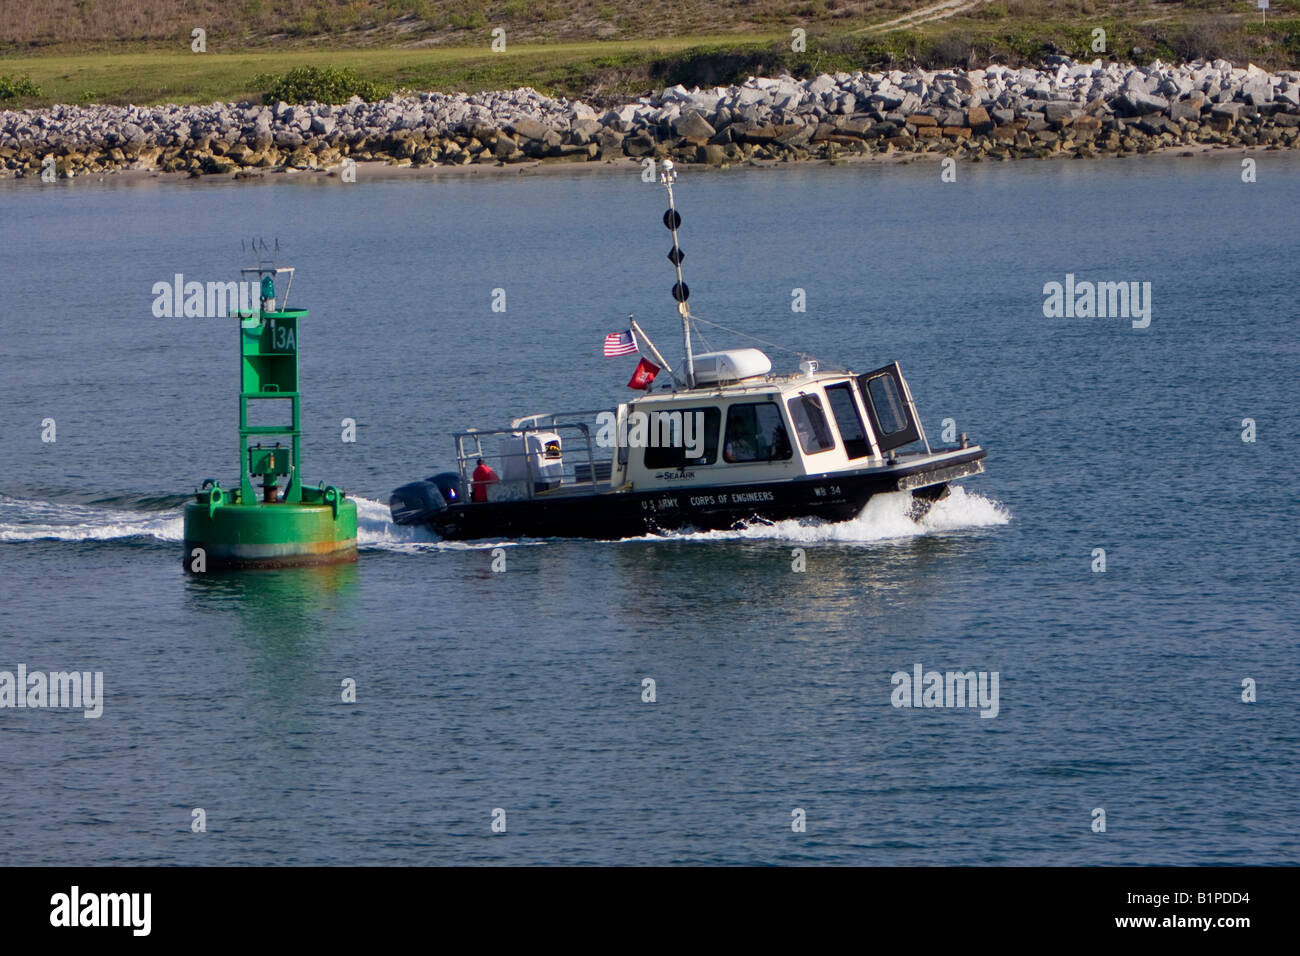 United States Army Corps of Engineers SeaArk Patrol Boat South of Cape Canaveral Florida Stock Photo